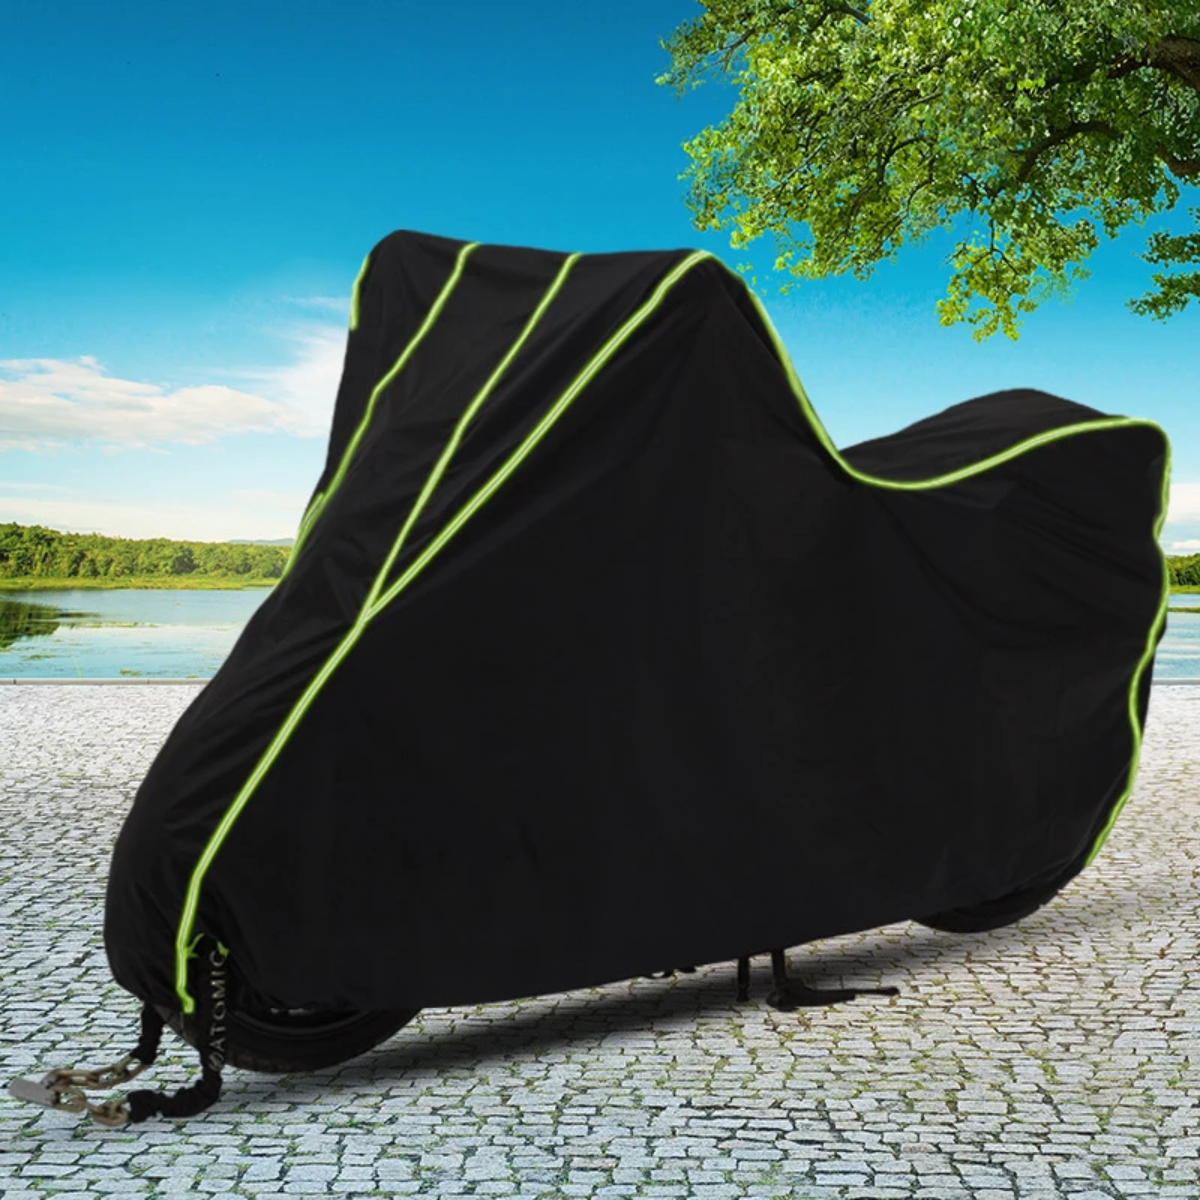 Outdoor Protective Motorcycle Cover